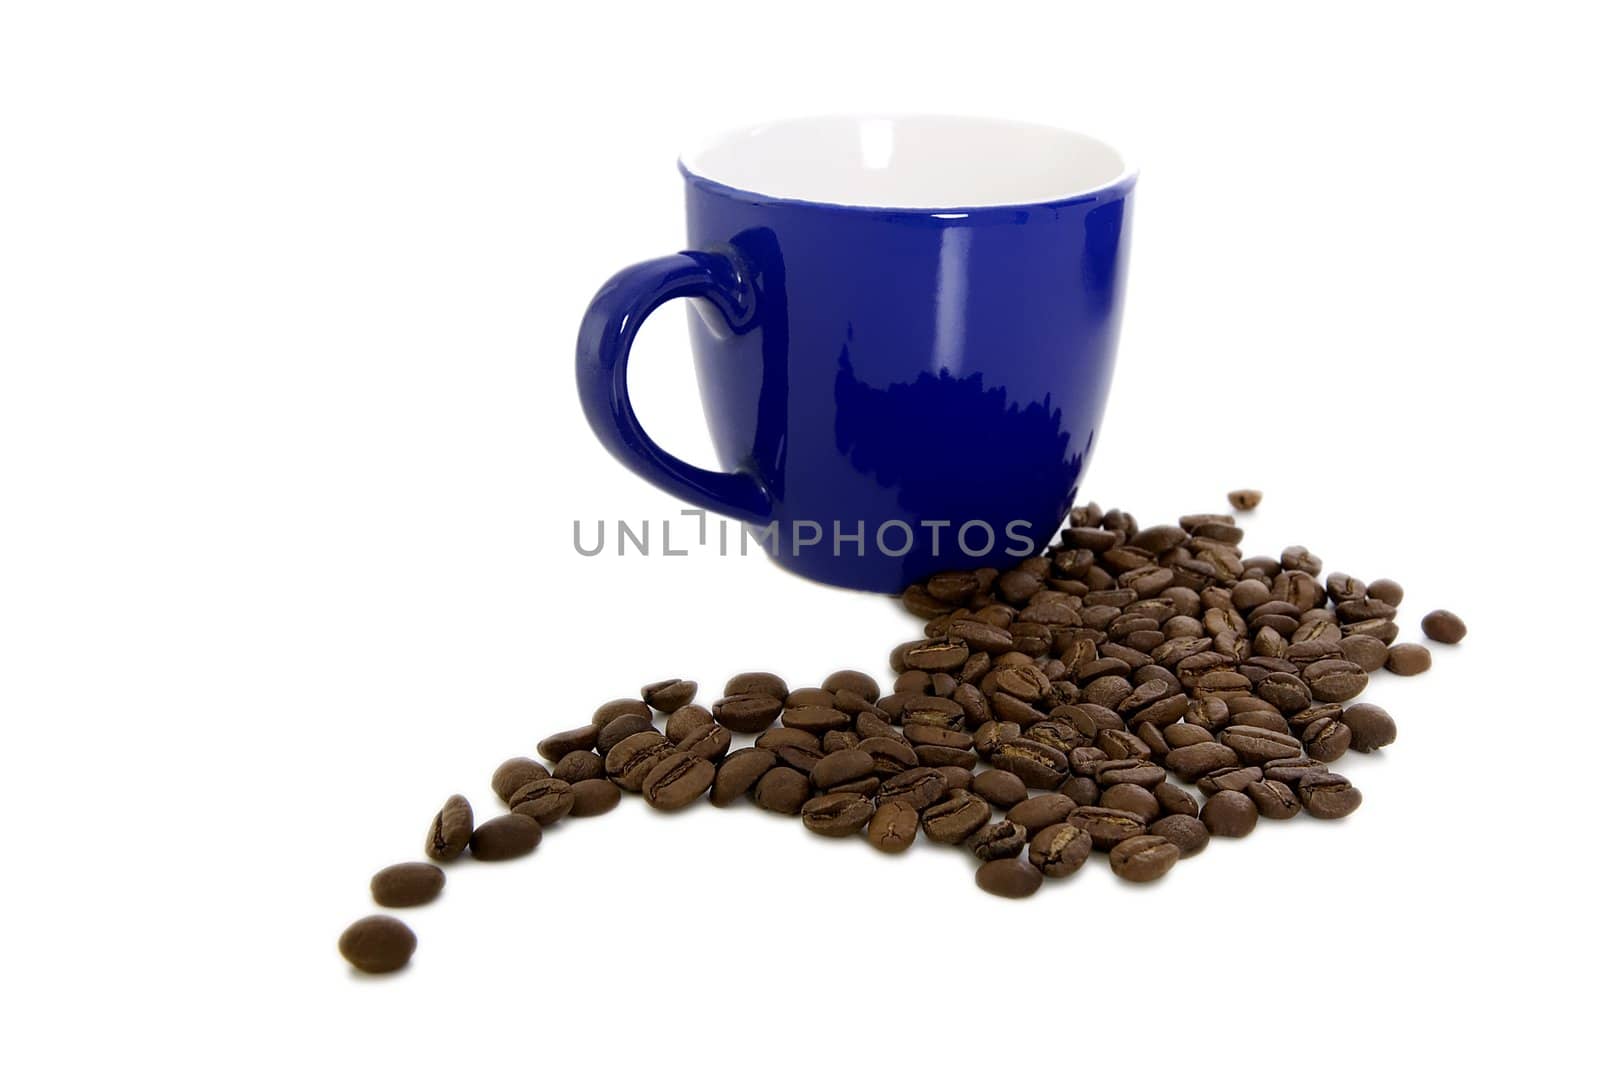 Dark blue mug and scattered coffee on a white background